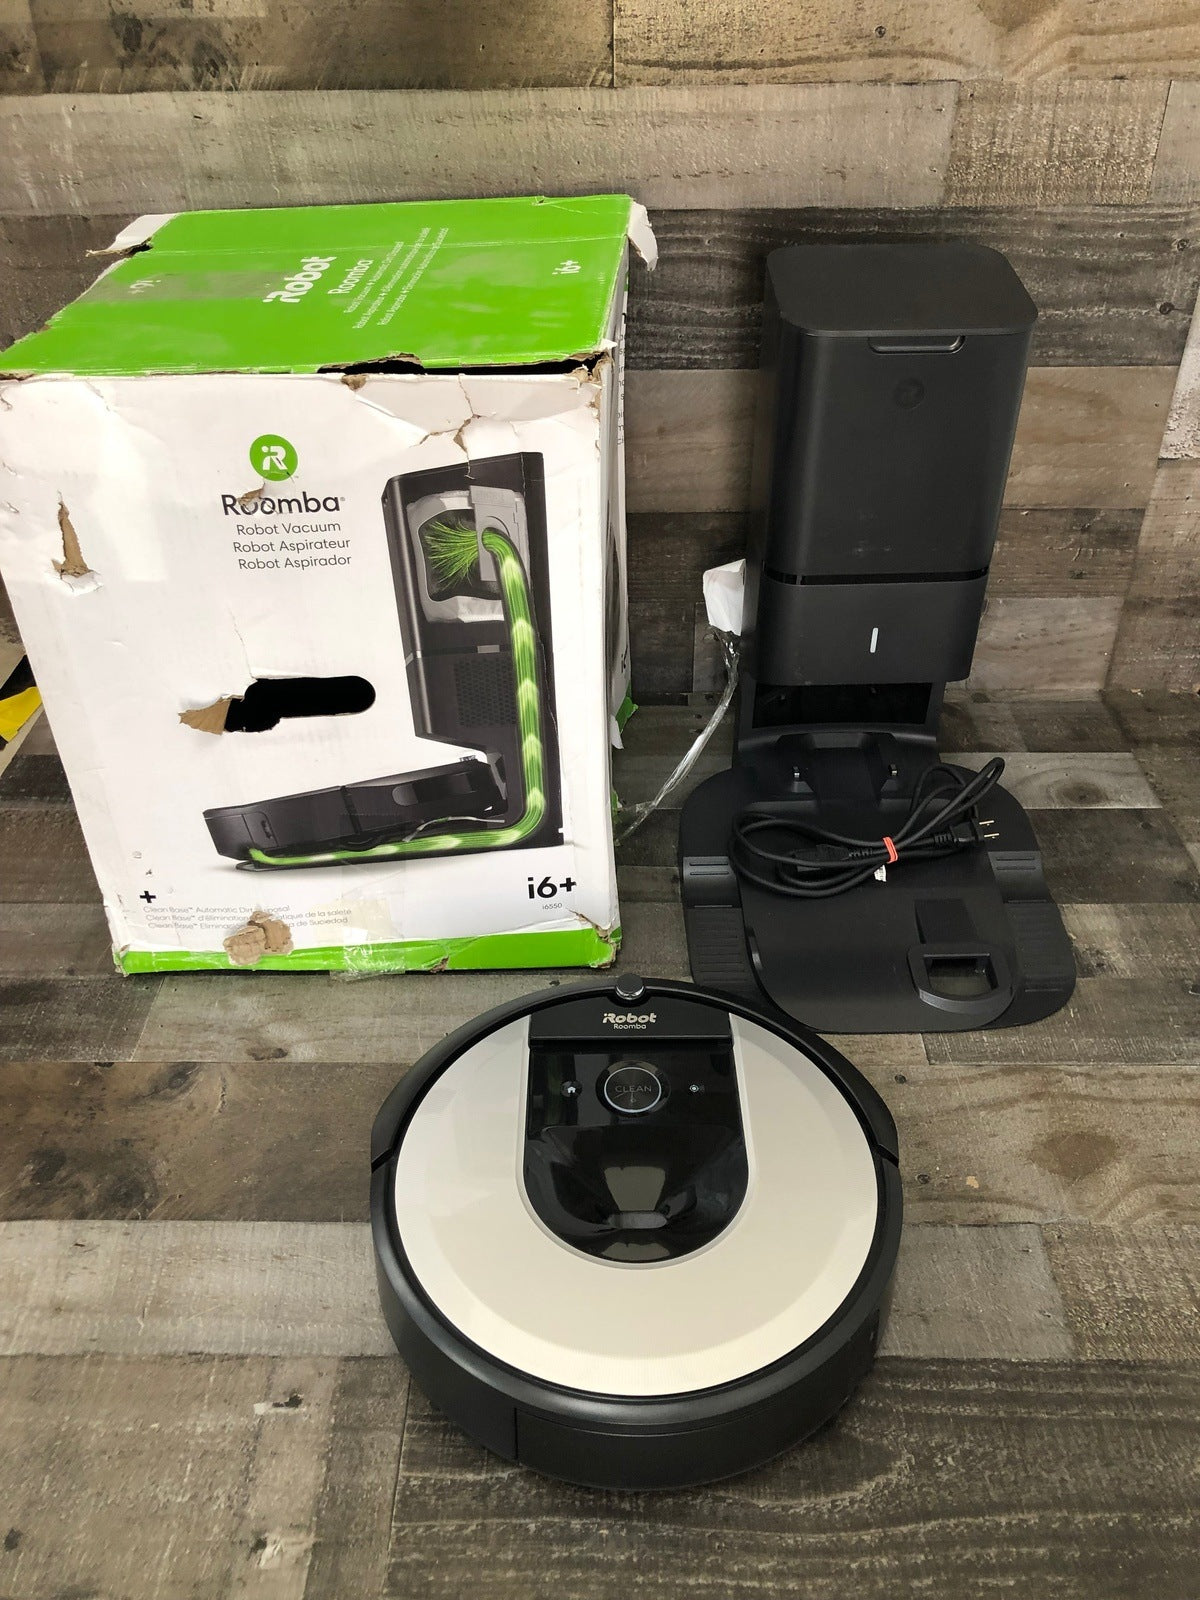 iRobot Roomba i6+ 6550 Robot Vacuum with Automatic Dirt Disposal-Empties Itself for up to 60 Days, Wi-Fi Connected, Works with Alexa, Carpets, Smart Mapping Upgrade - Clean & Schedule by Room